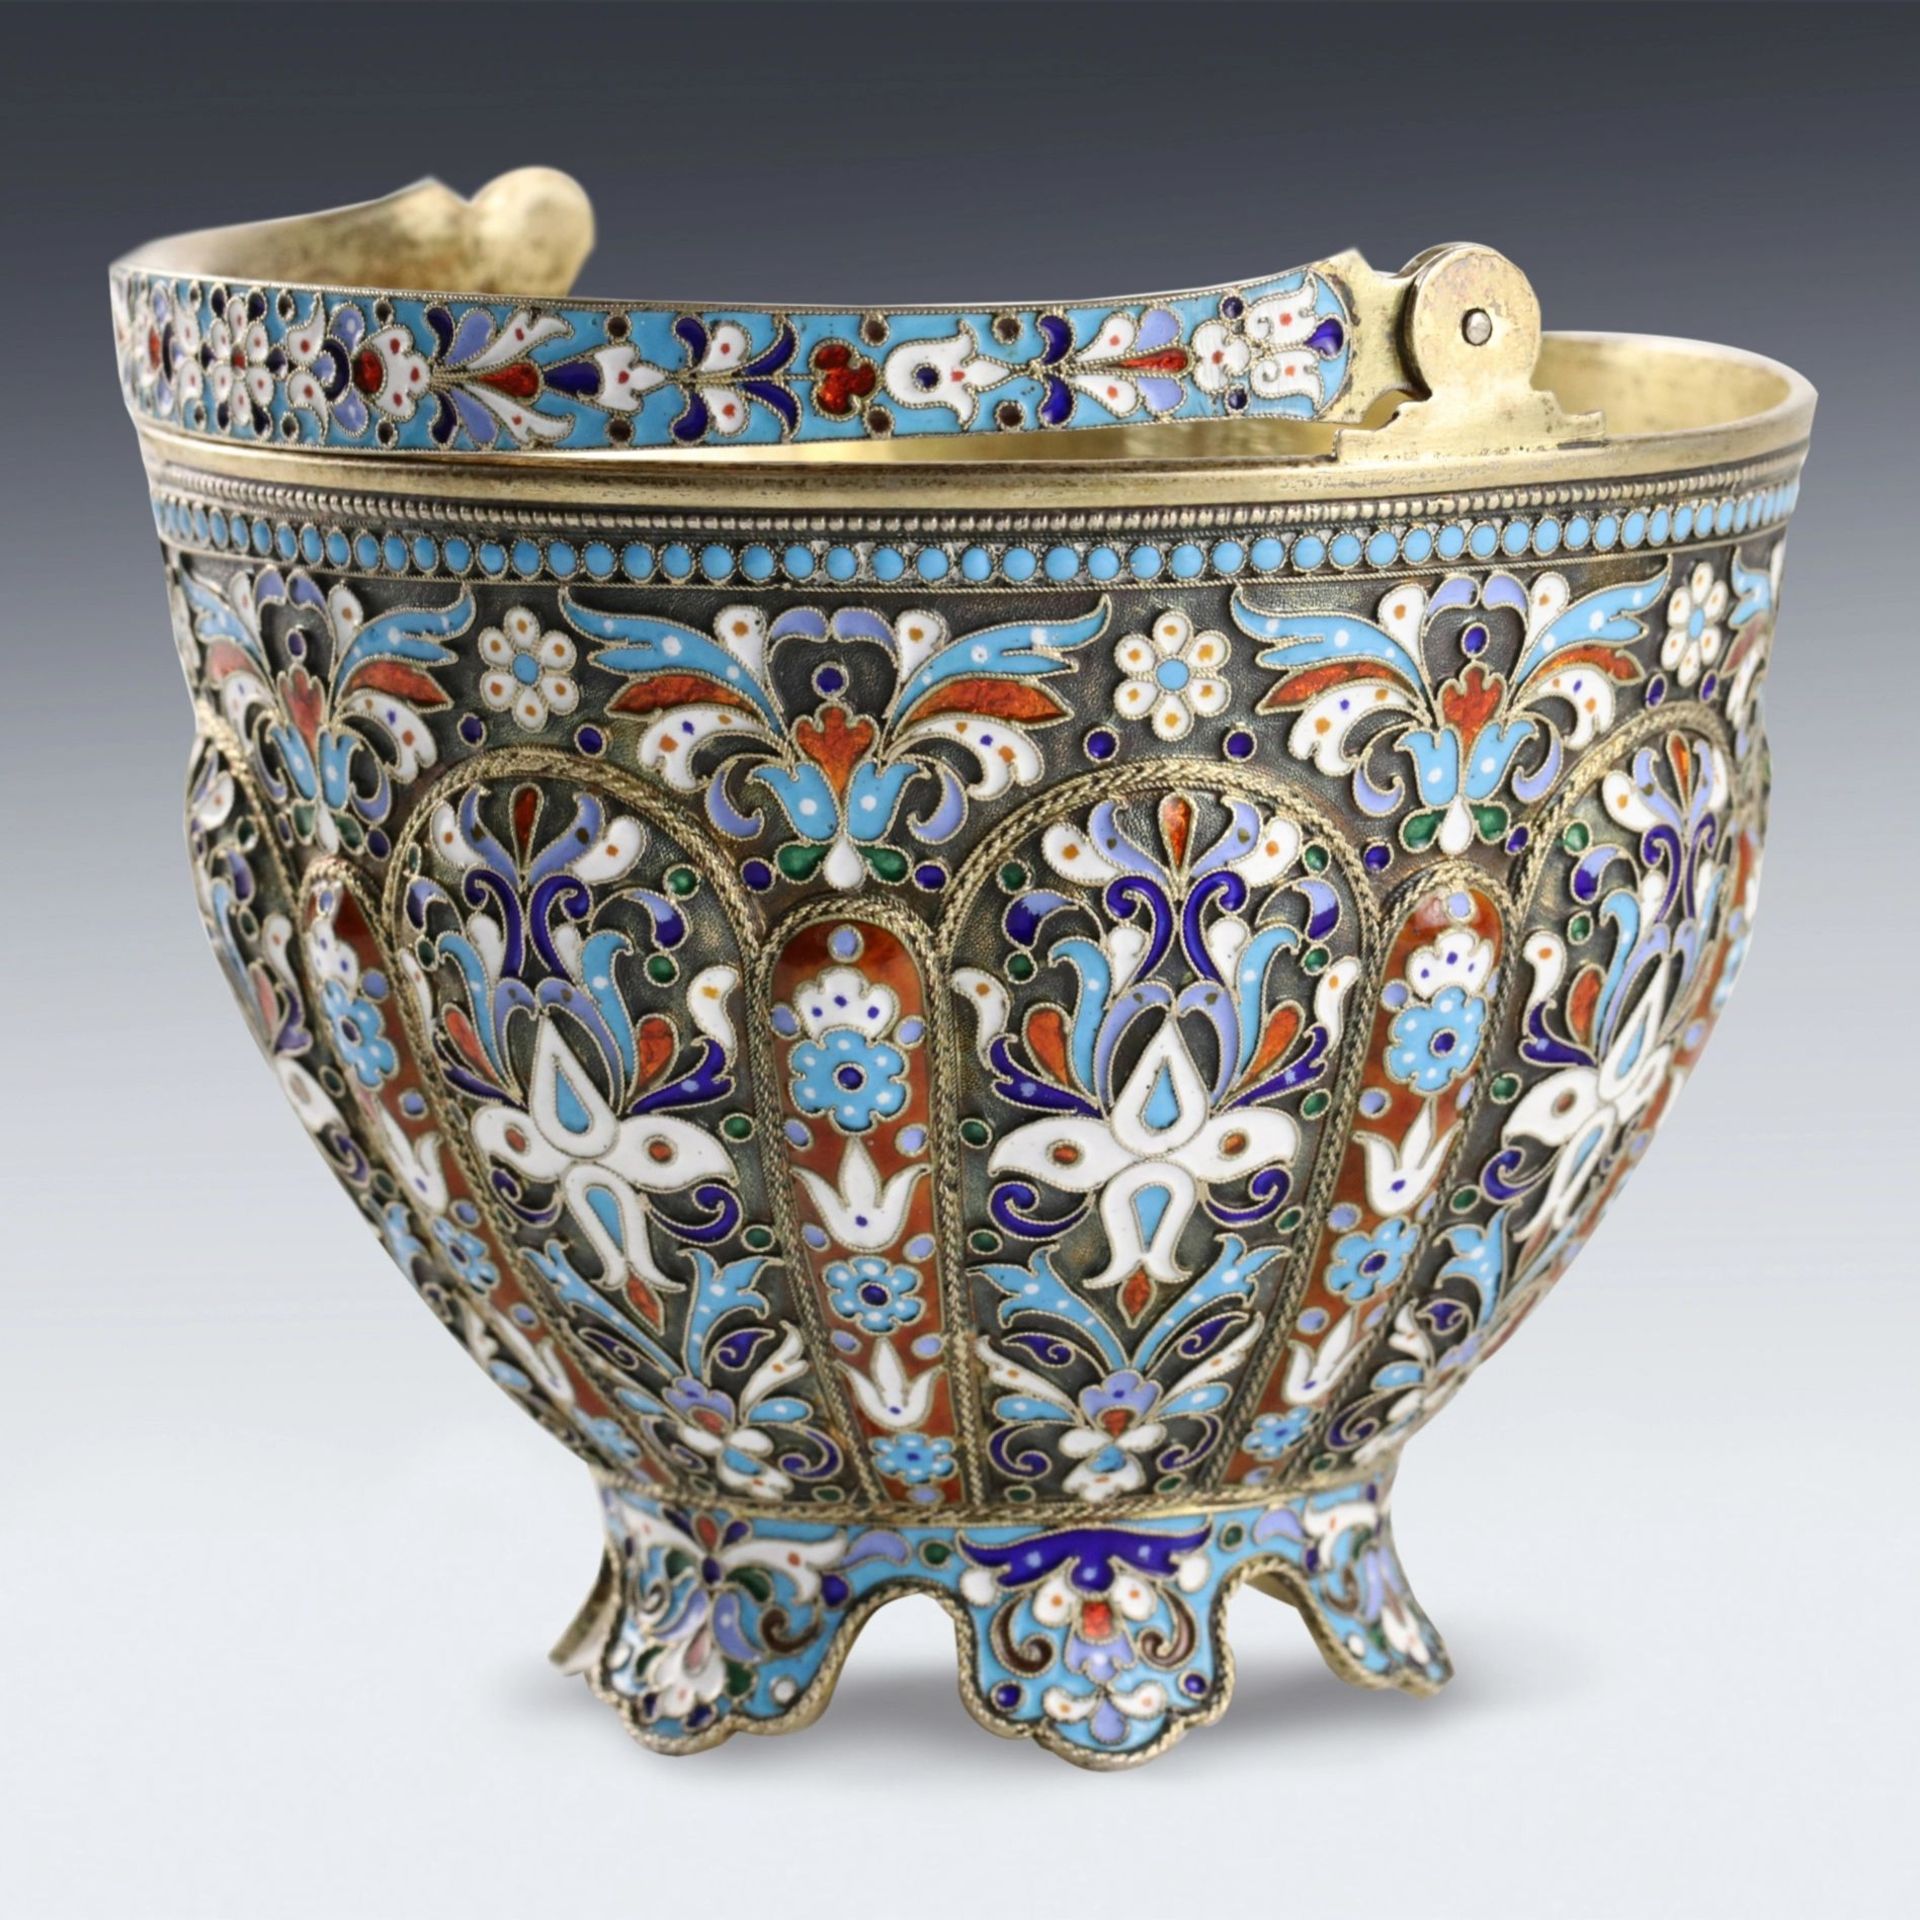 Russian silver sugar bowl with cloisonne enamel. - Image 6 of 9